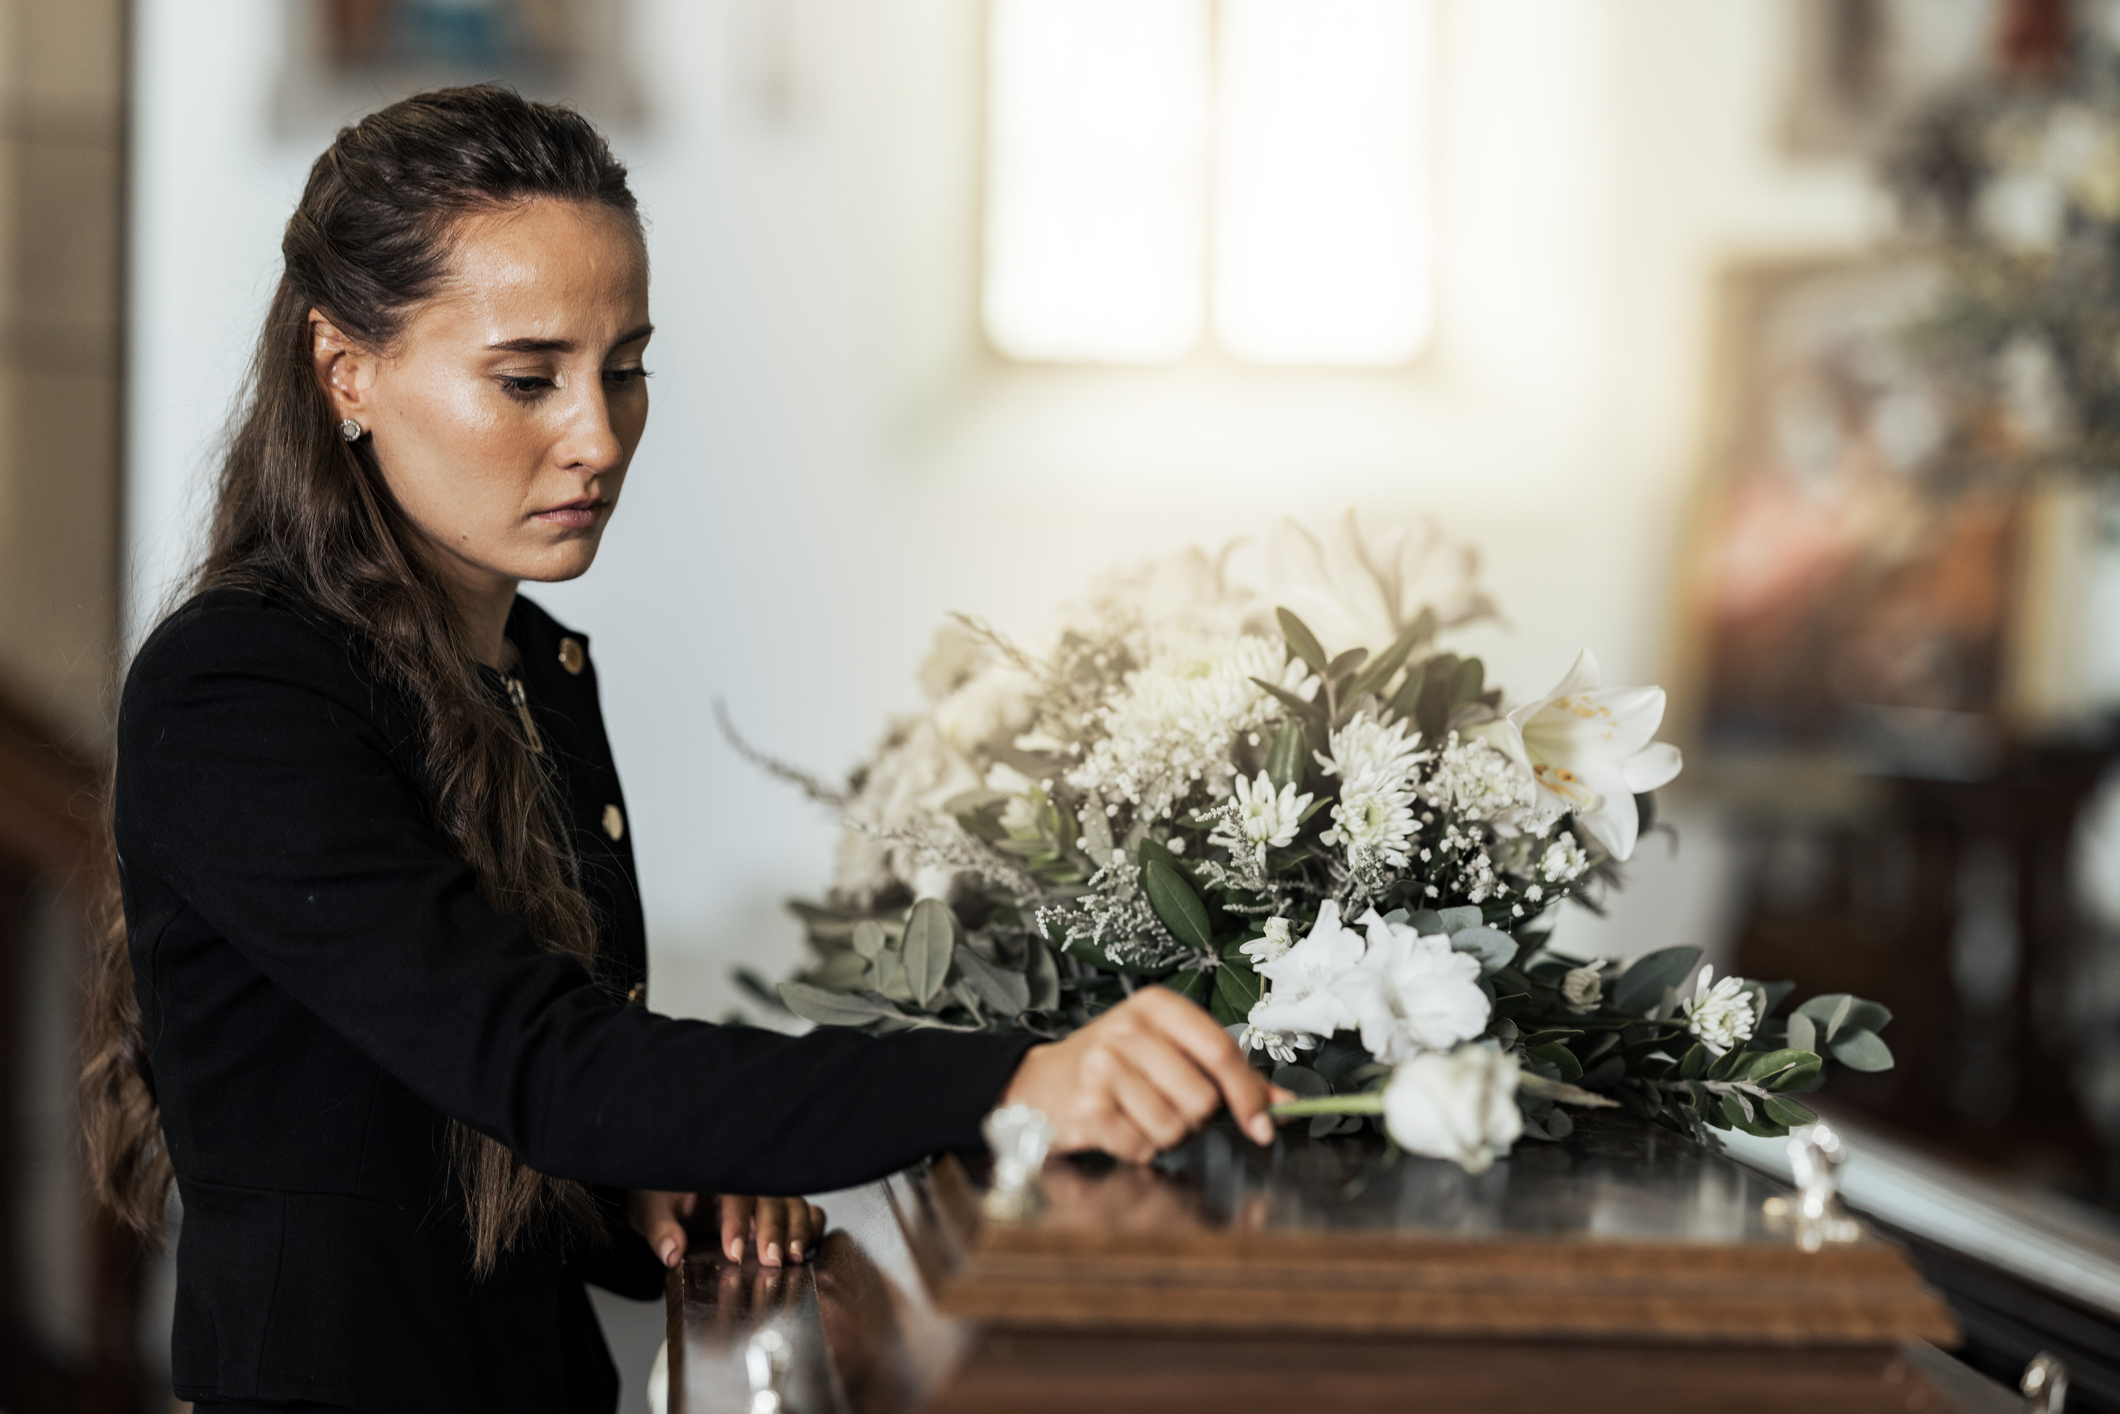 Funeral, sad and woman with flower on coffin after loss of a loved one, family or friend. Grief, death and young female putting a rose on casket in church with sadness, depression and mourning. Call our Orlando wrongful death lawyer today.